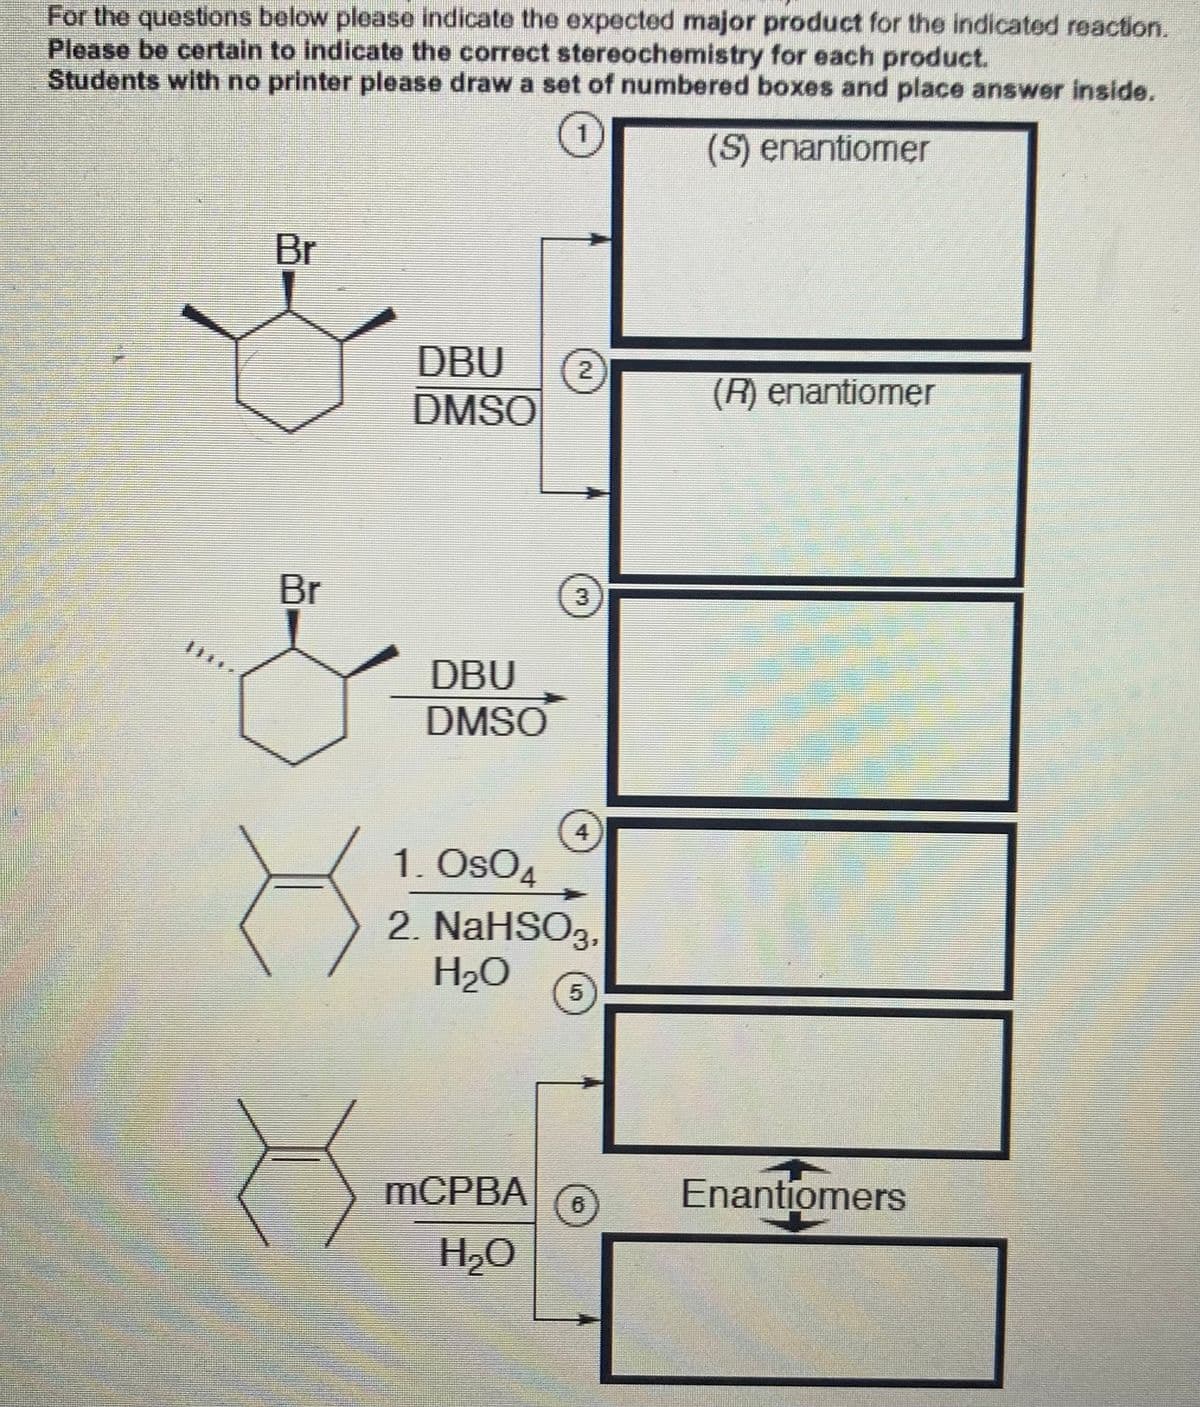 For the questions below please indicate the expected major product for the indicated reaction.
Please be certain to indicate the correct stereochemistry for each product.
Students with no printer please draw a set of numbered boxes and place answer inside.
(S) enantiomer
Br
DBU
DMSO
(R) enantiomer
Br
3
DBU
DMSO
4
1. OsO4
2. NaHSO3,
H2O
5
MCPBA
6
Enantiomers
H20
2.
